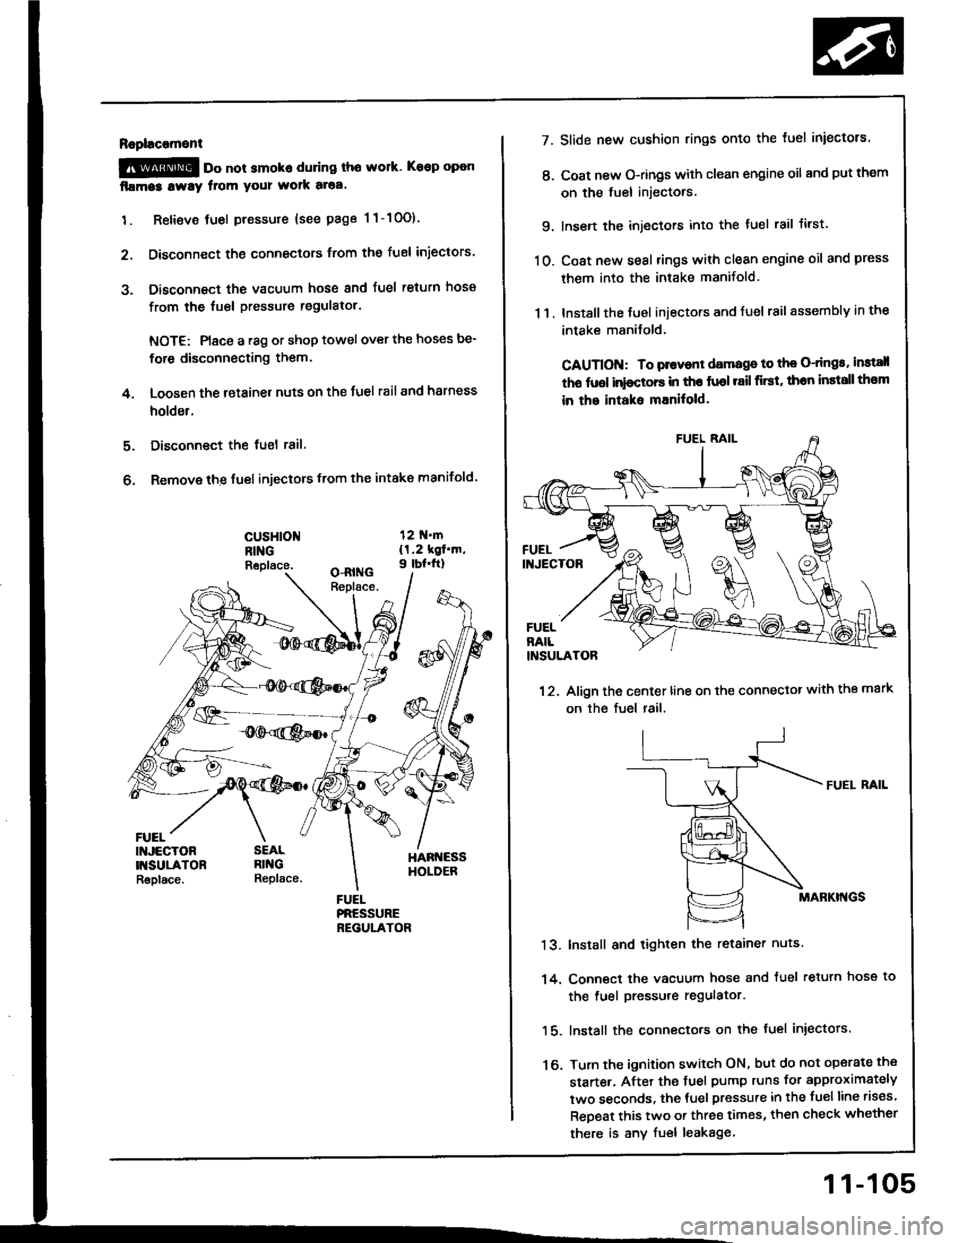 HONDA INTEGRA 1994 4.G User Guide Rapl!c!ment
@ oo not smoko during tho work. Keep open
fllma3 lway from your wolk aloa.
1. Retieve tuel pressure {see page 1 1-10O).
2. Disconnect the connectors trom the fuel iniectors.
3. Disconnect 